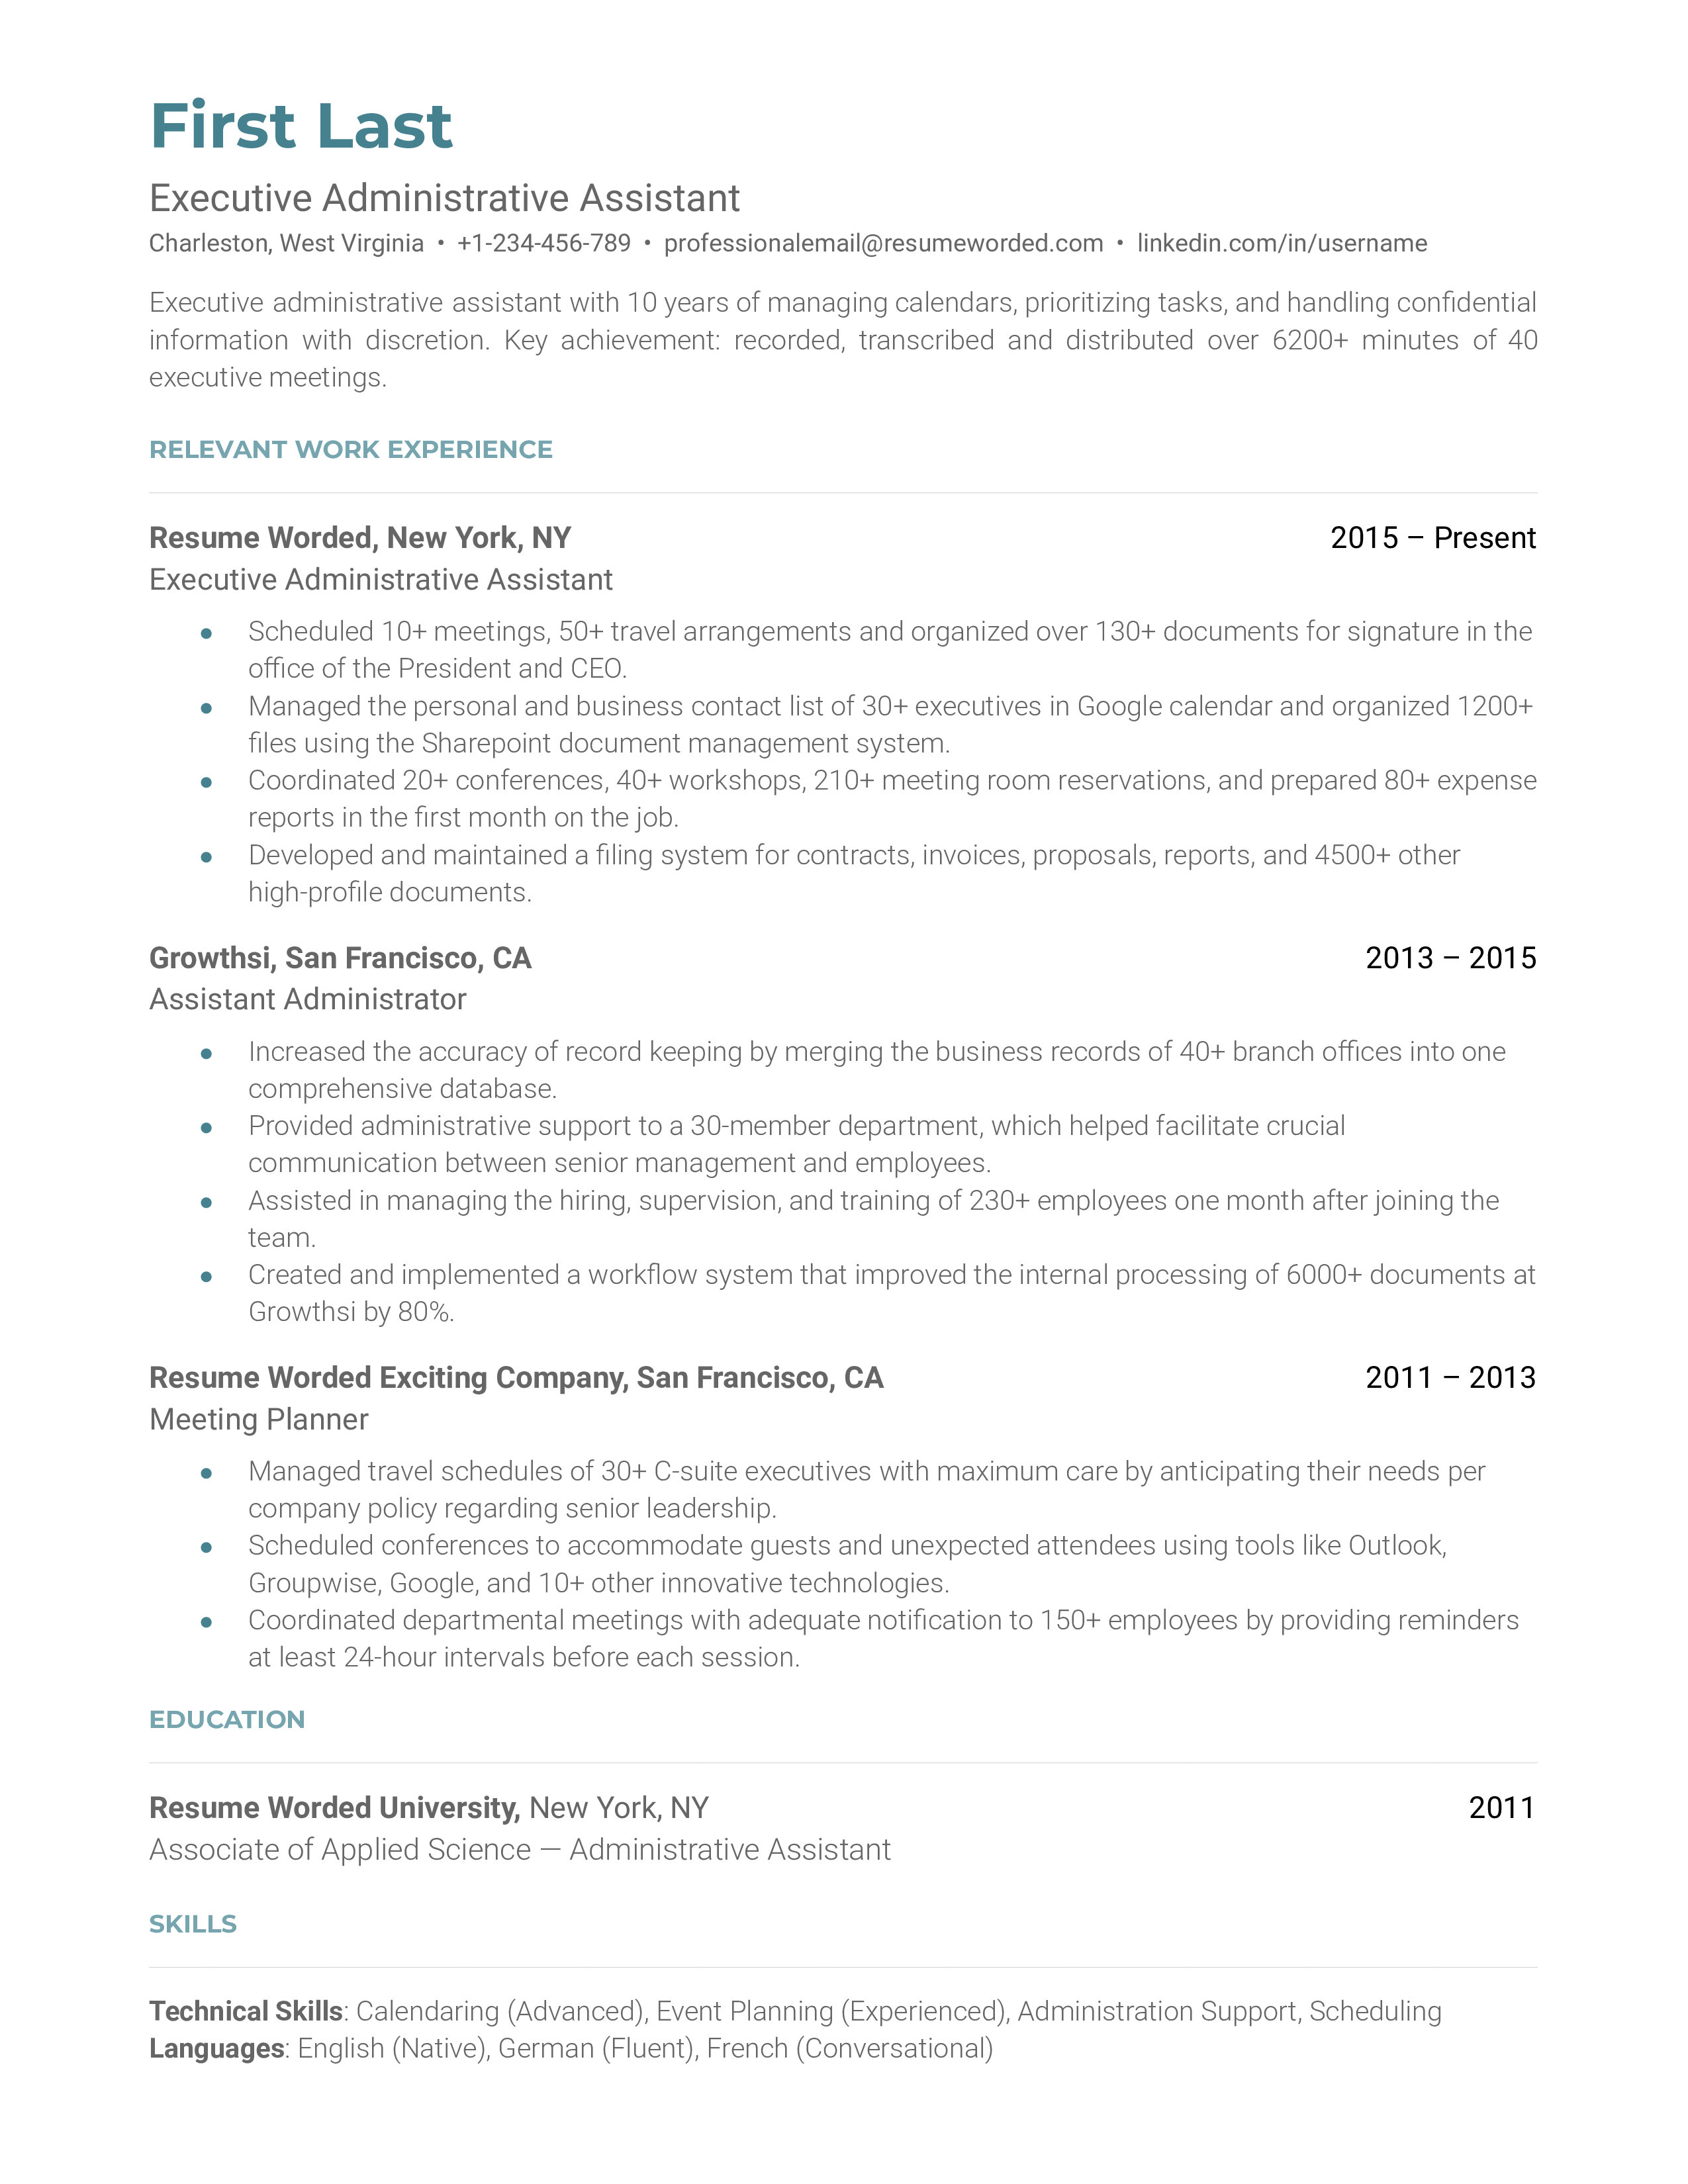 A well-structured CV for an Executive Administrative Assistant position.